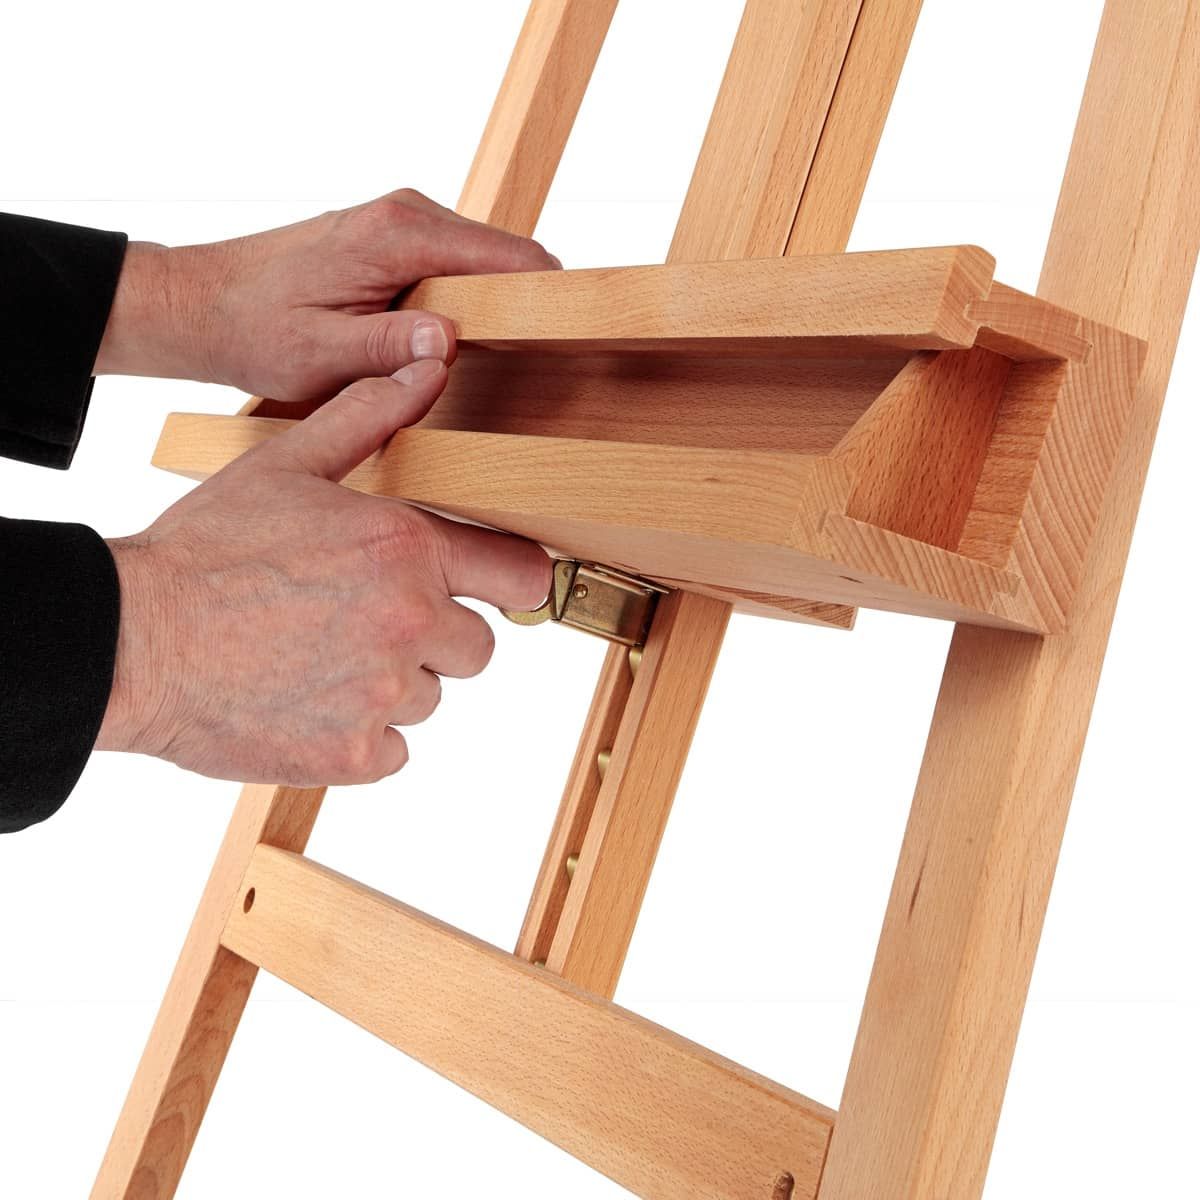 Canvas height adjustment system aided by a metal ratchet located under the bottom easel tray